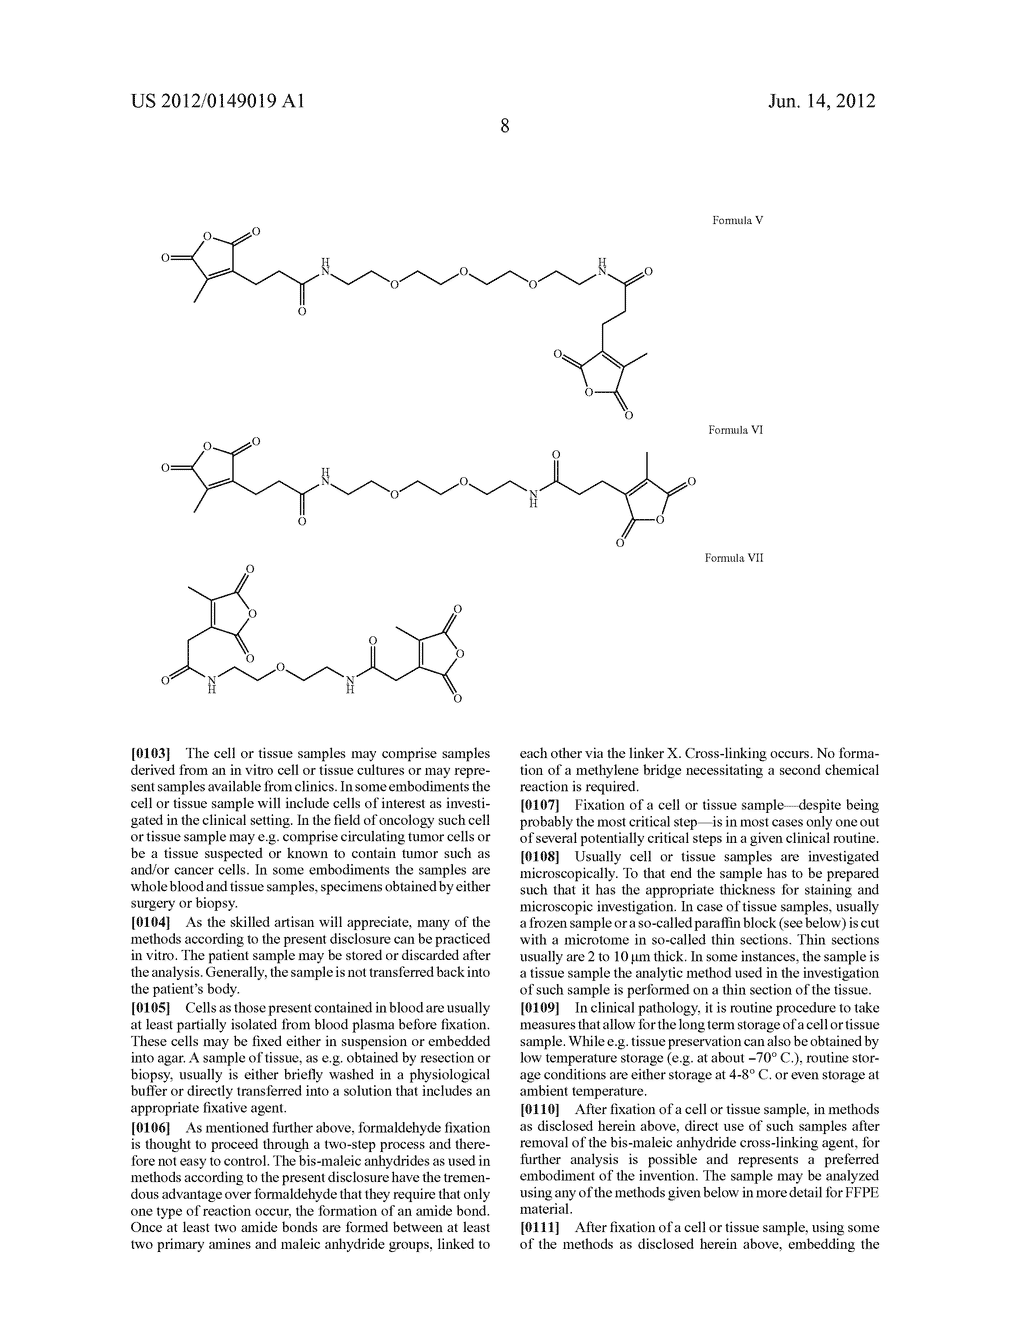 USE OF A BIS-MALEIC ANHYDRIDE CROSS-LINKING AGENT FOR FIXATION OF A CELL     OR TISSUE SAMPLE - diagram, schematic, and image 13